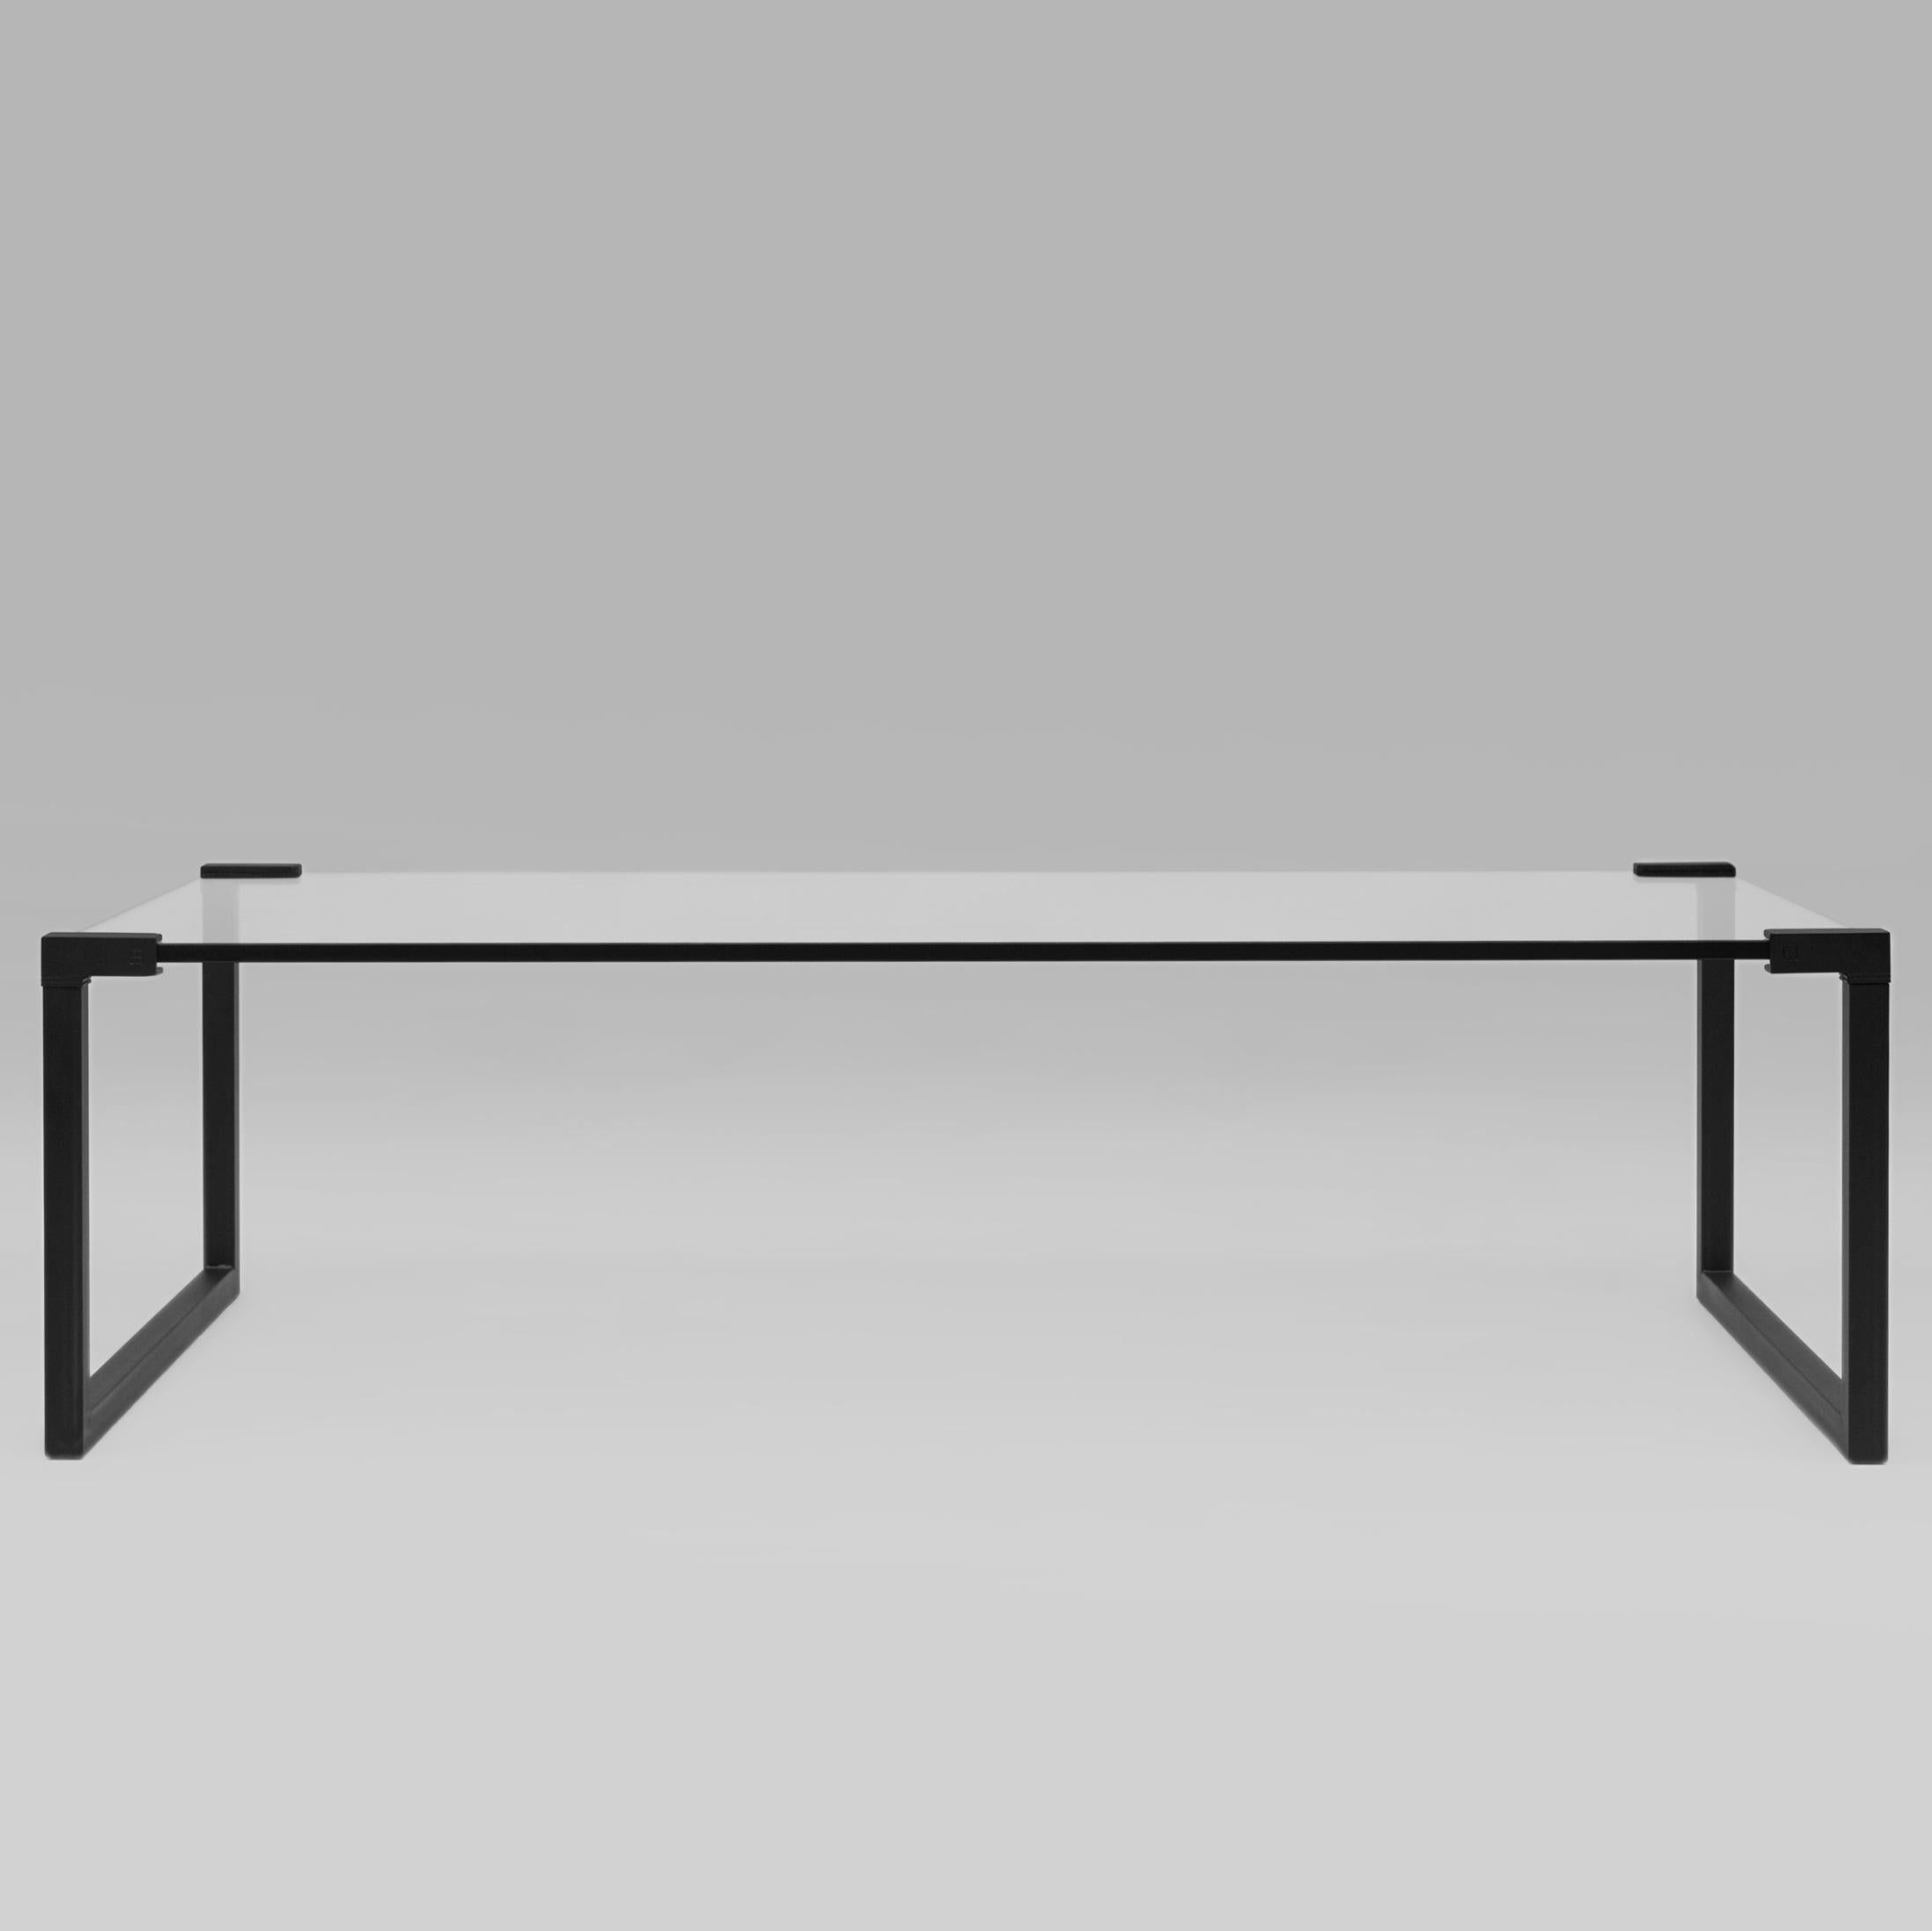 Contemporary coffee table designed by Peter Ghyczy.
Manufactured by Ghyczy (Netherlands)

The twin frames are constructed of 3 × 3 square tubes and secured to the tabletop by cast metal details. The 15 mm glass top is available in clear, optiwhite